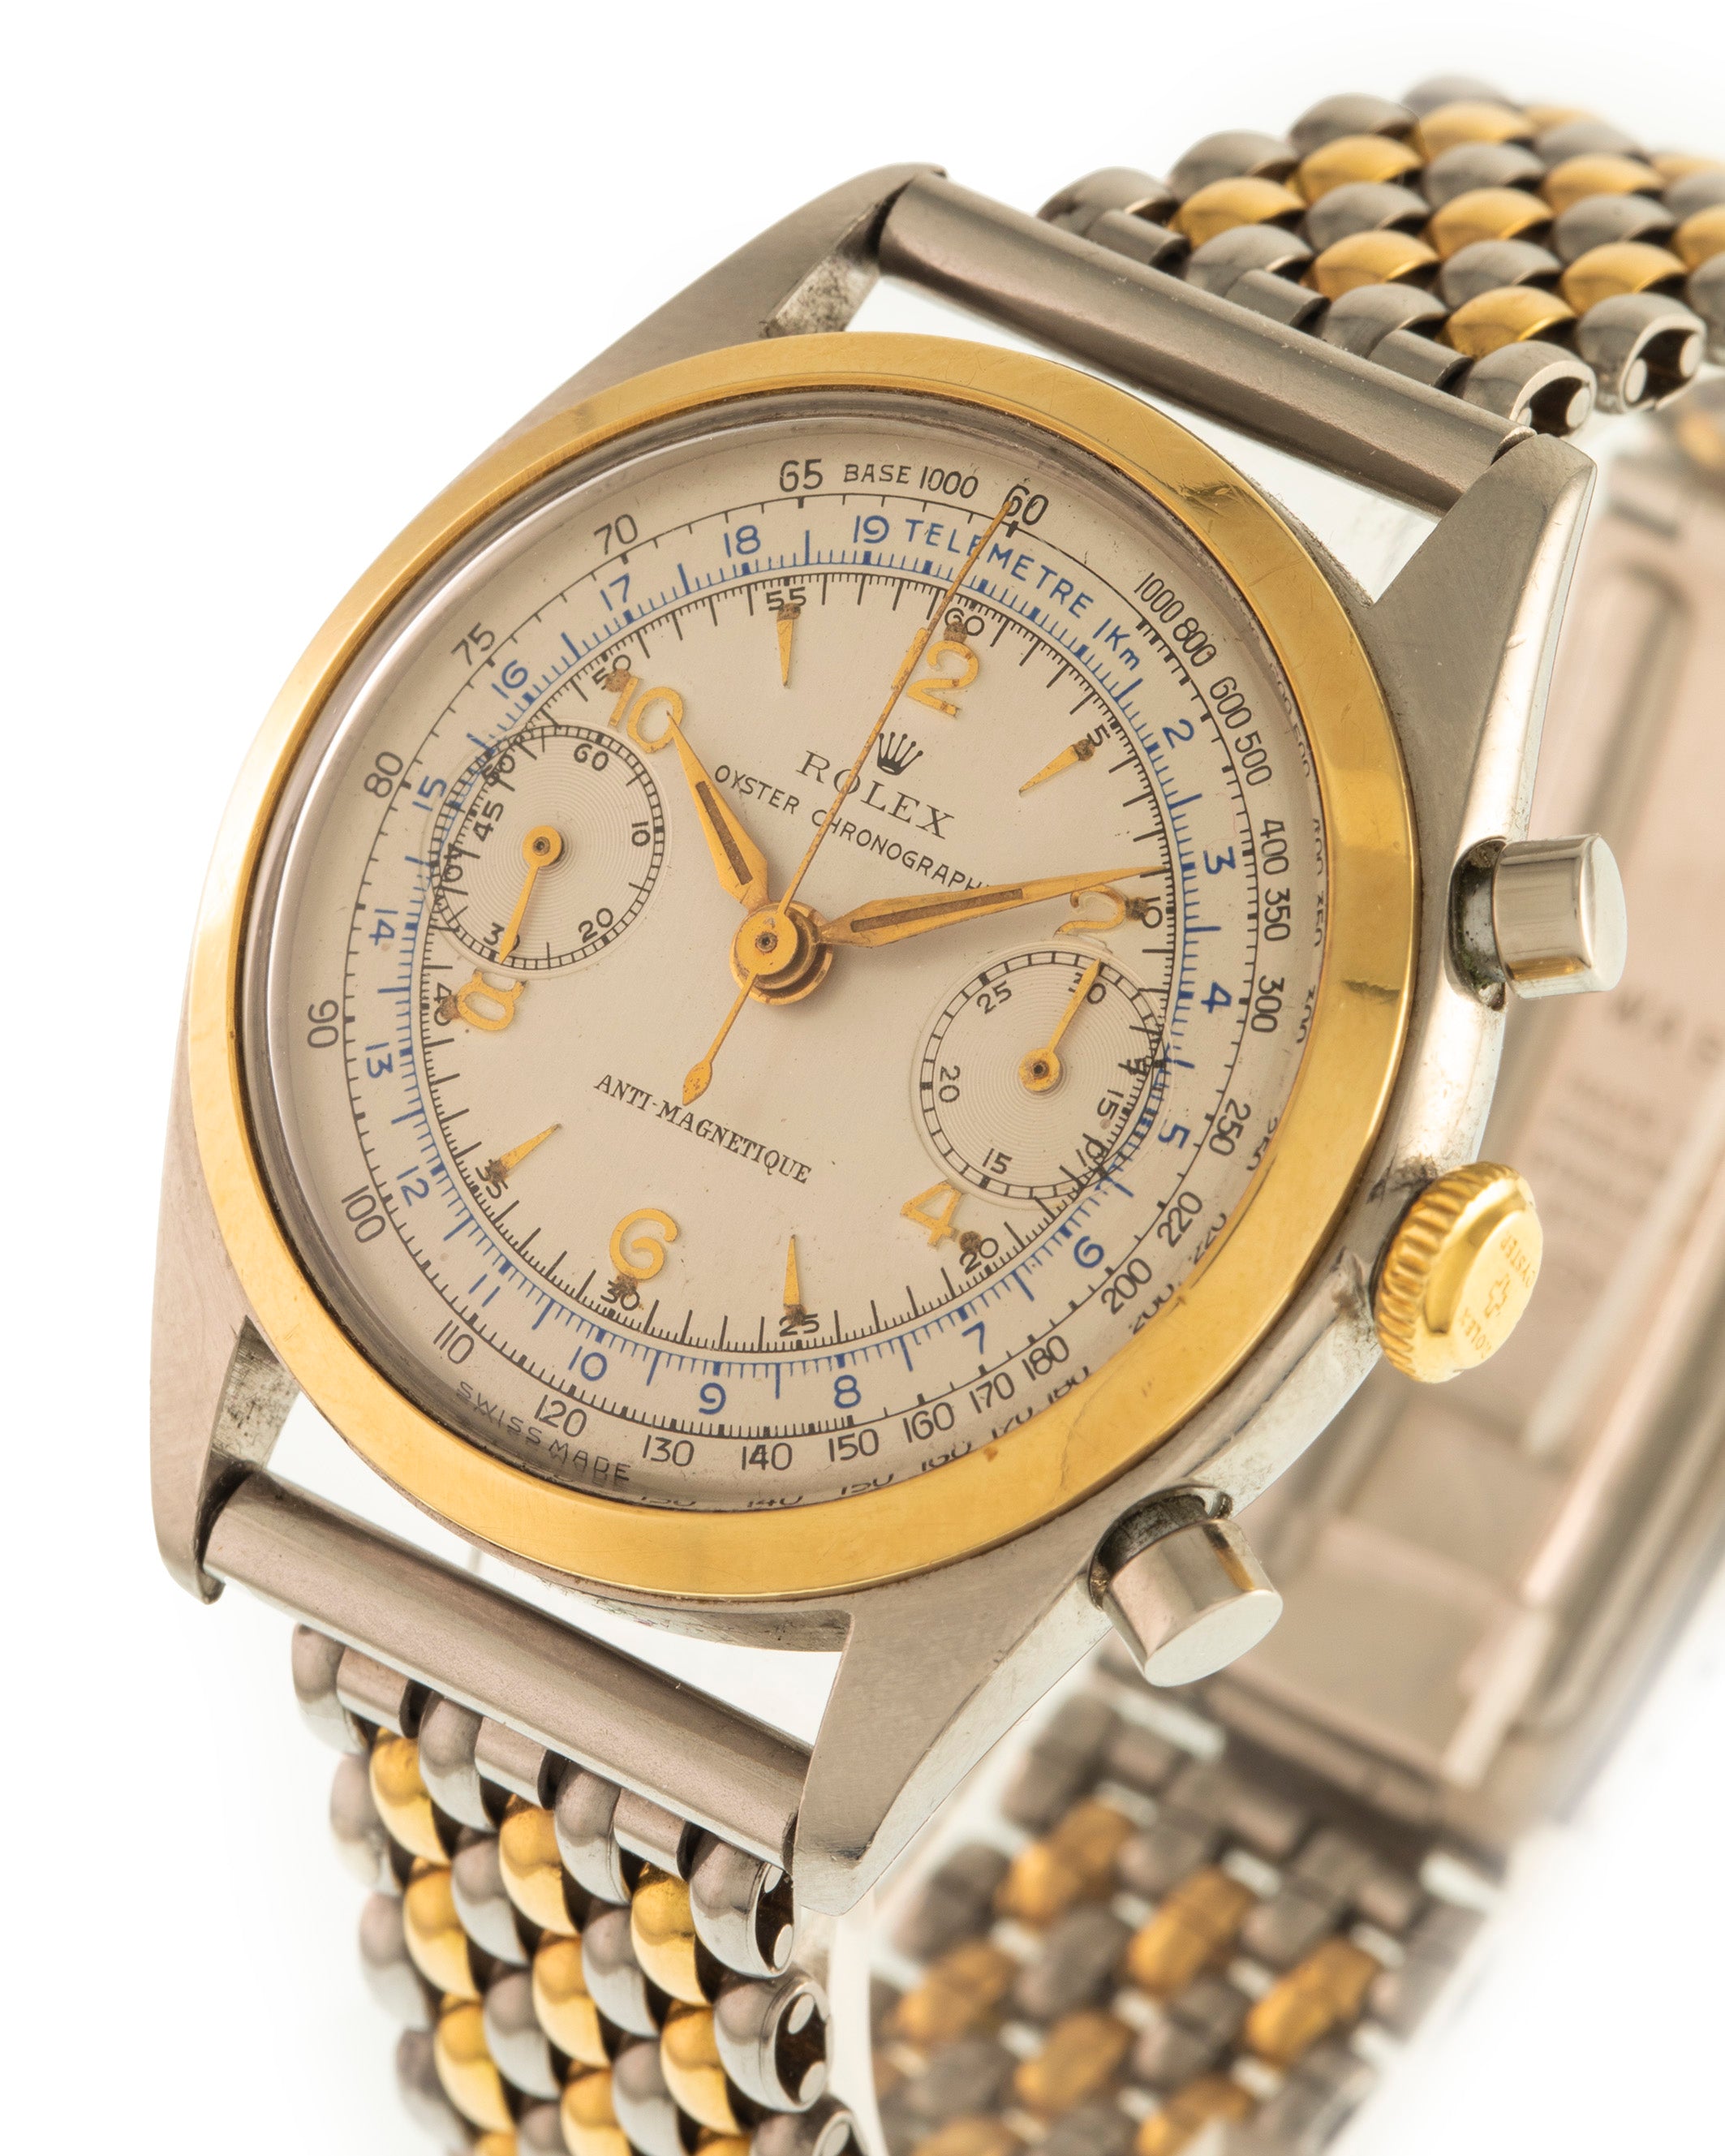 Rolex Chronograph "Monoblocco" Ref. 4500 in steel and gold